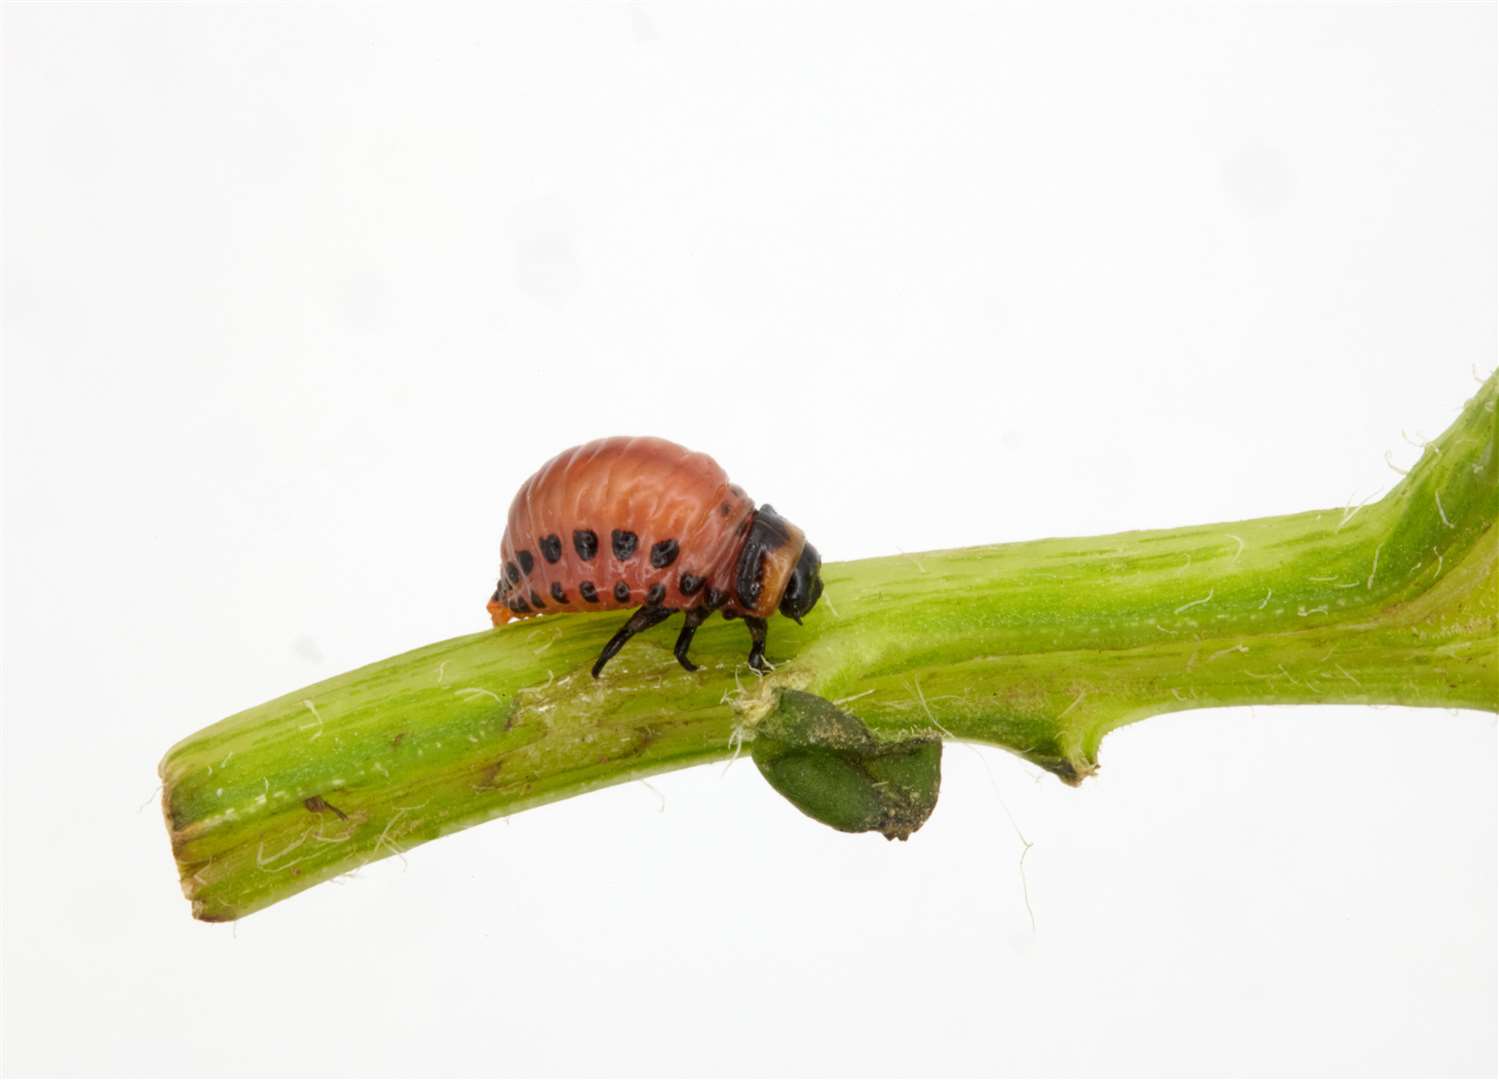 The beetles larvae are a reddish brown in colour, round and globular, and up to 15mm in length Picture: Fera-Science Limited